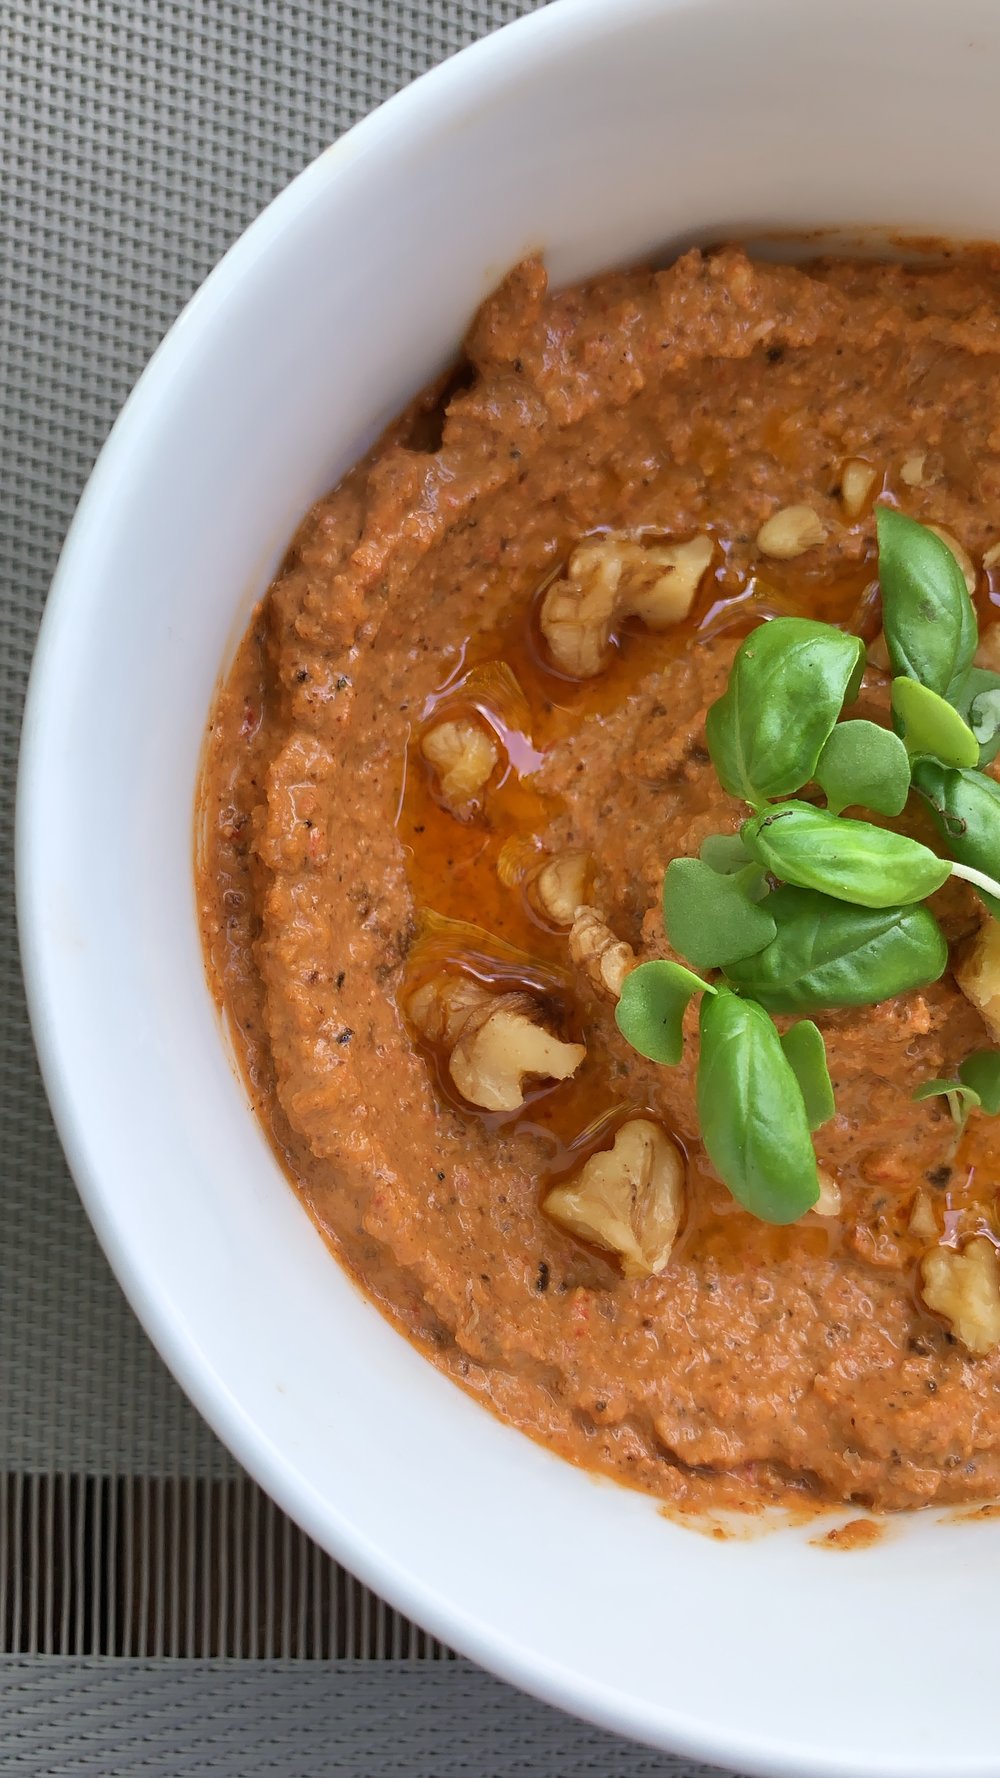 Muhammara… loaded with nutrition! Omega-3’s from walnuts + red peppers loaded in vitamin B6, vitamin C and folate.